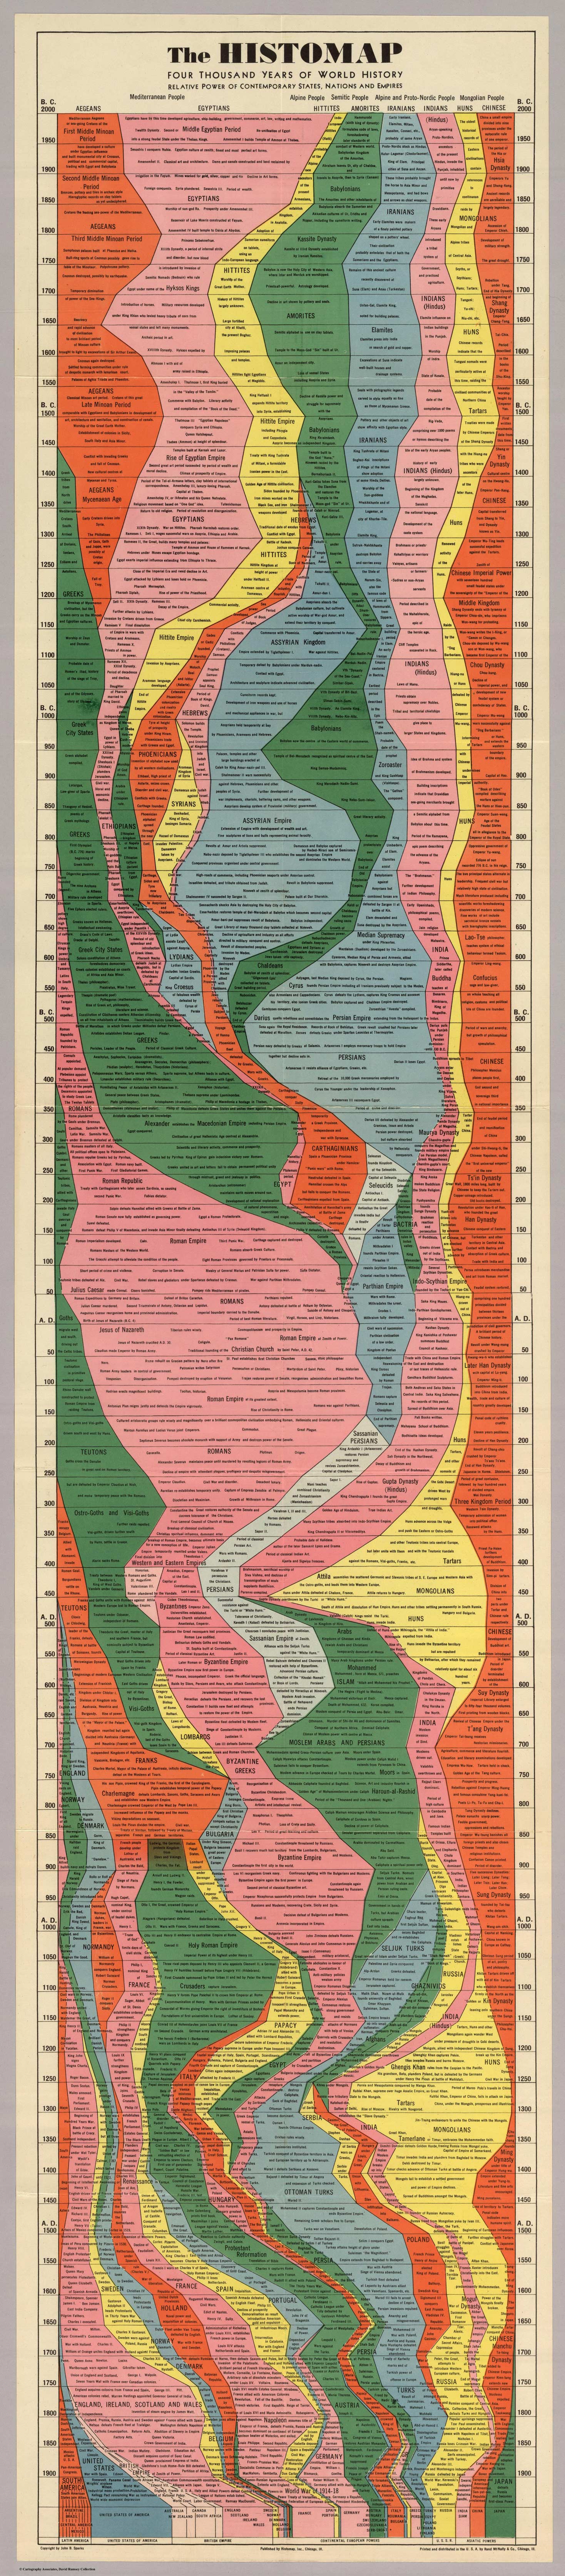 Rand McNally and John B. Sparks "The Histomap of Four Thousand Years of World History"